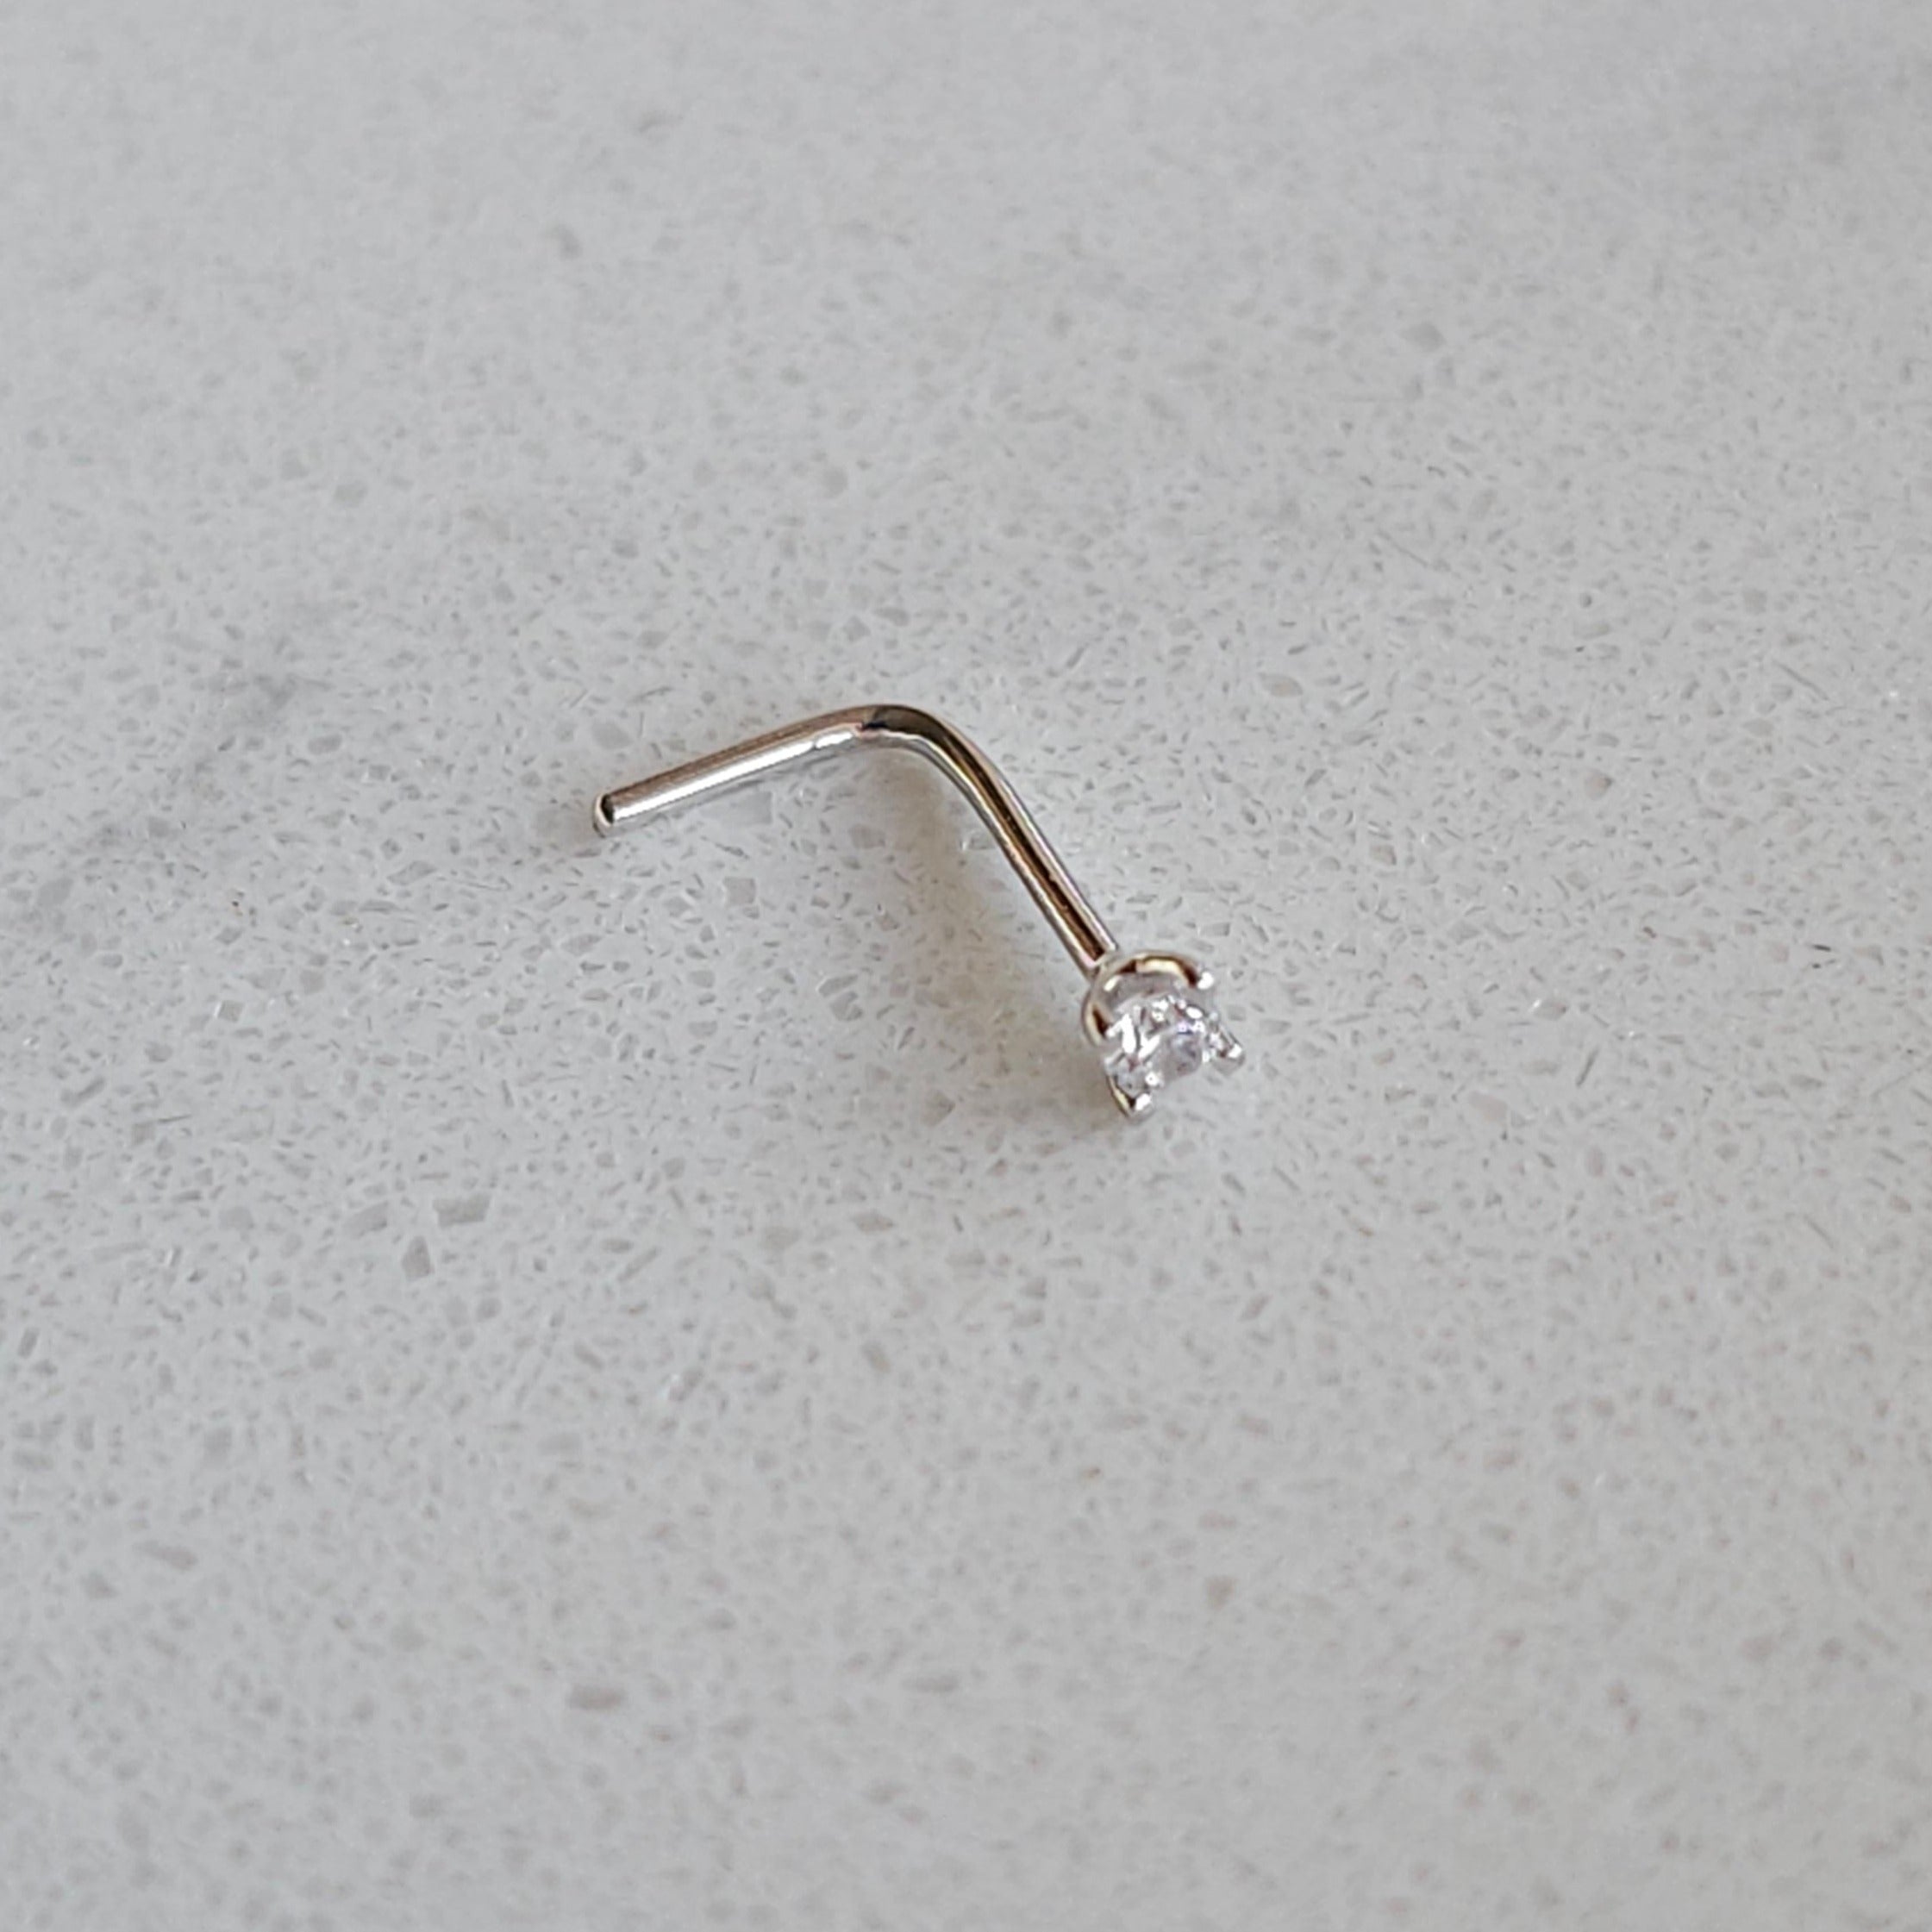 CHLUXE Solitaire Crystal Nose Stud - 14K White Gold